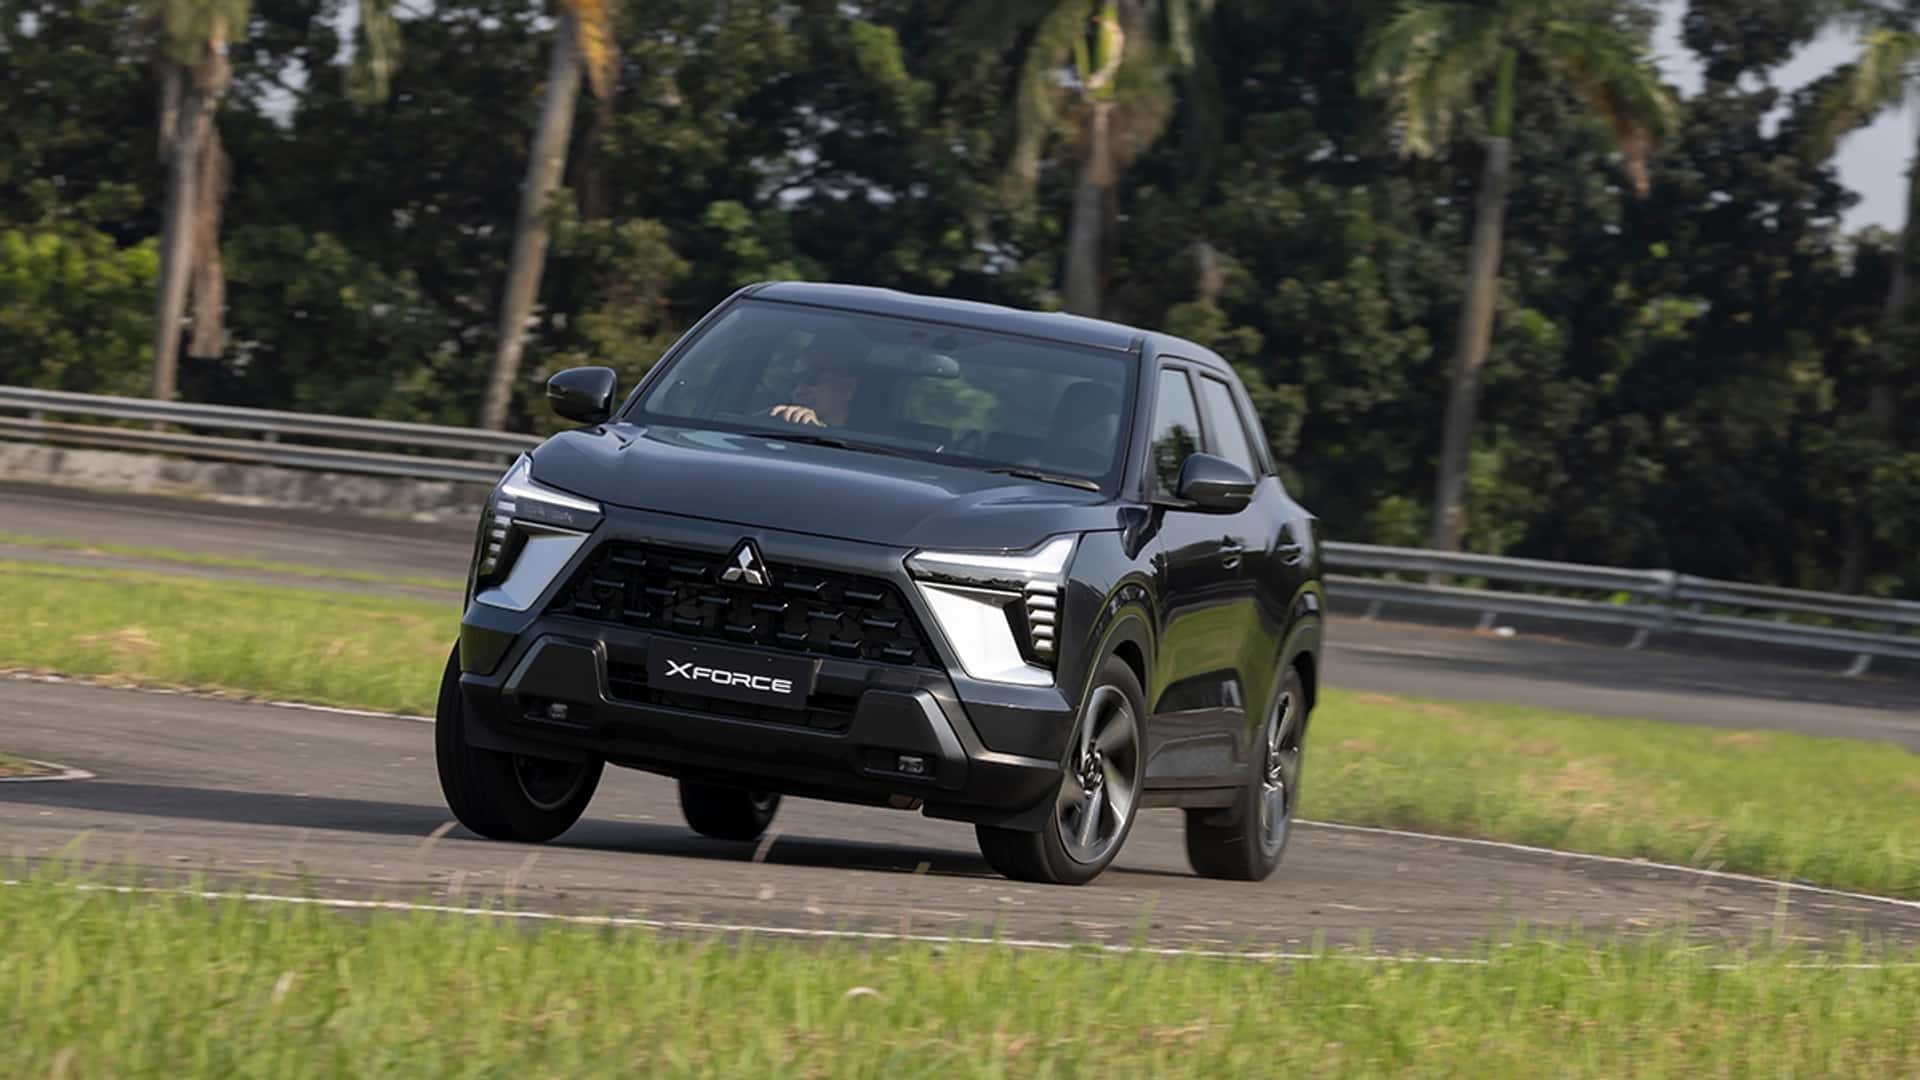 Mitsubishi Xforce will be equipped with additional advanced safety features in the future Mitsubishi Xforce 2024, with an estimated price of 600 million VND in Vietnam, will be very hot mitsubishi-xforce-2023.jpg